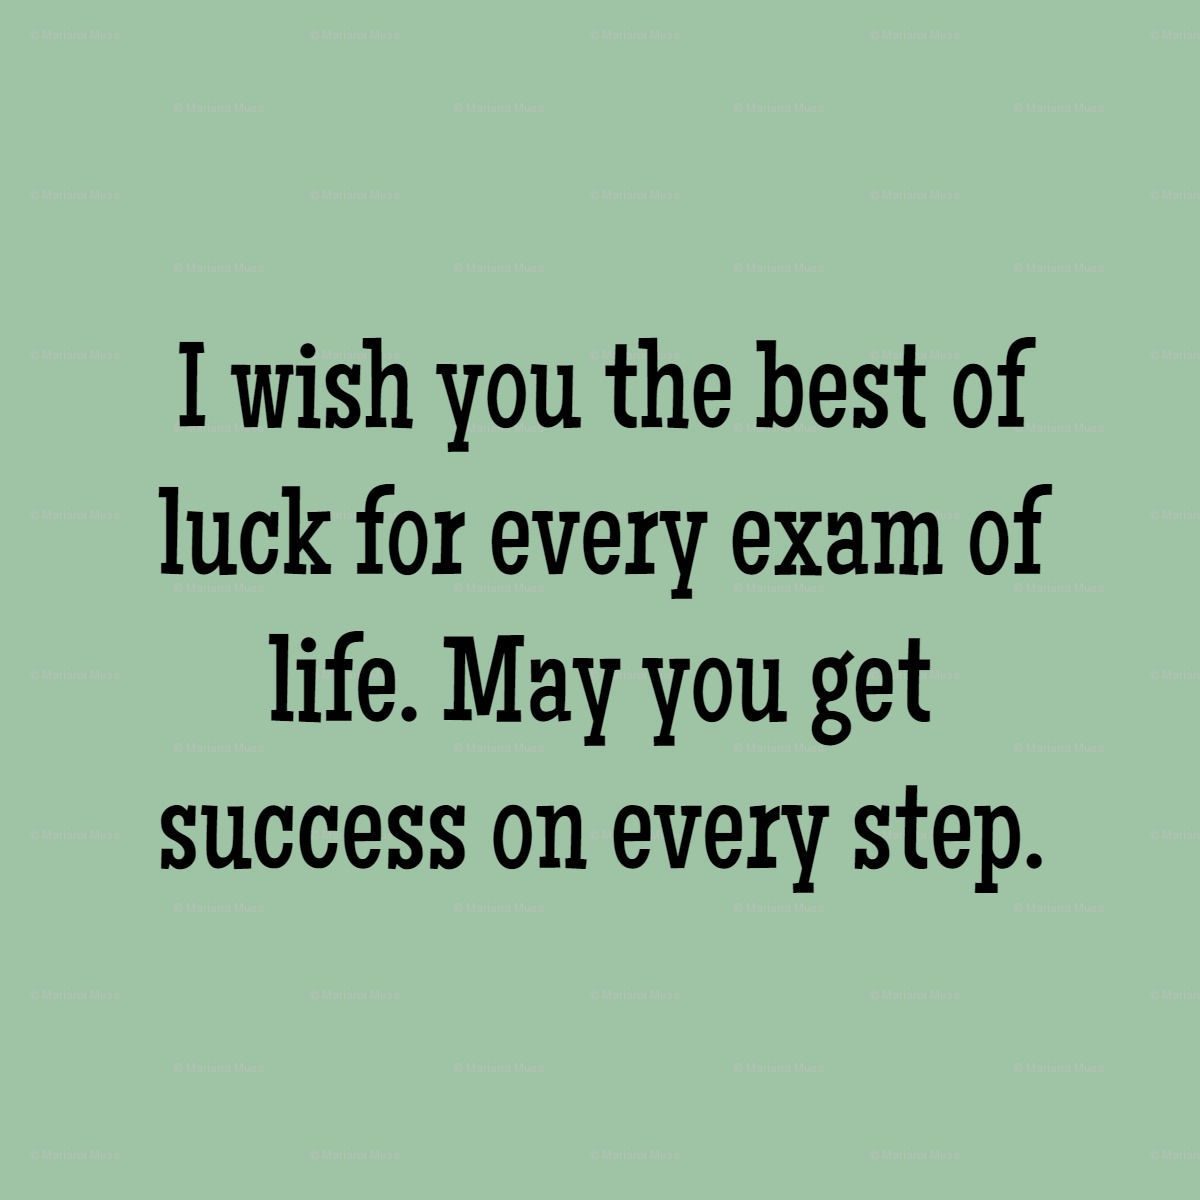 Success wishes in exams